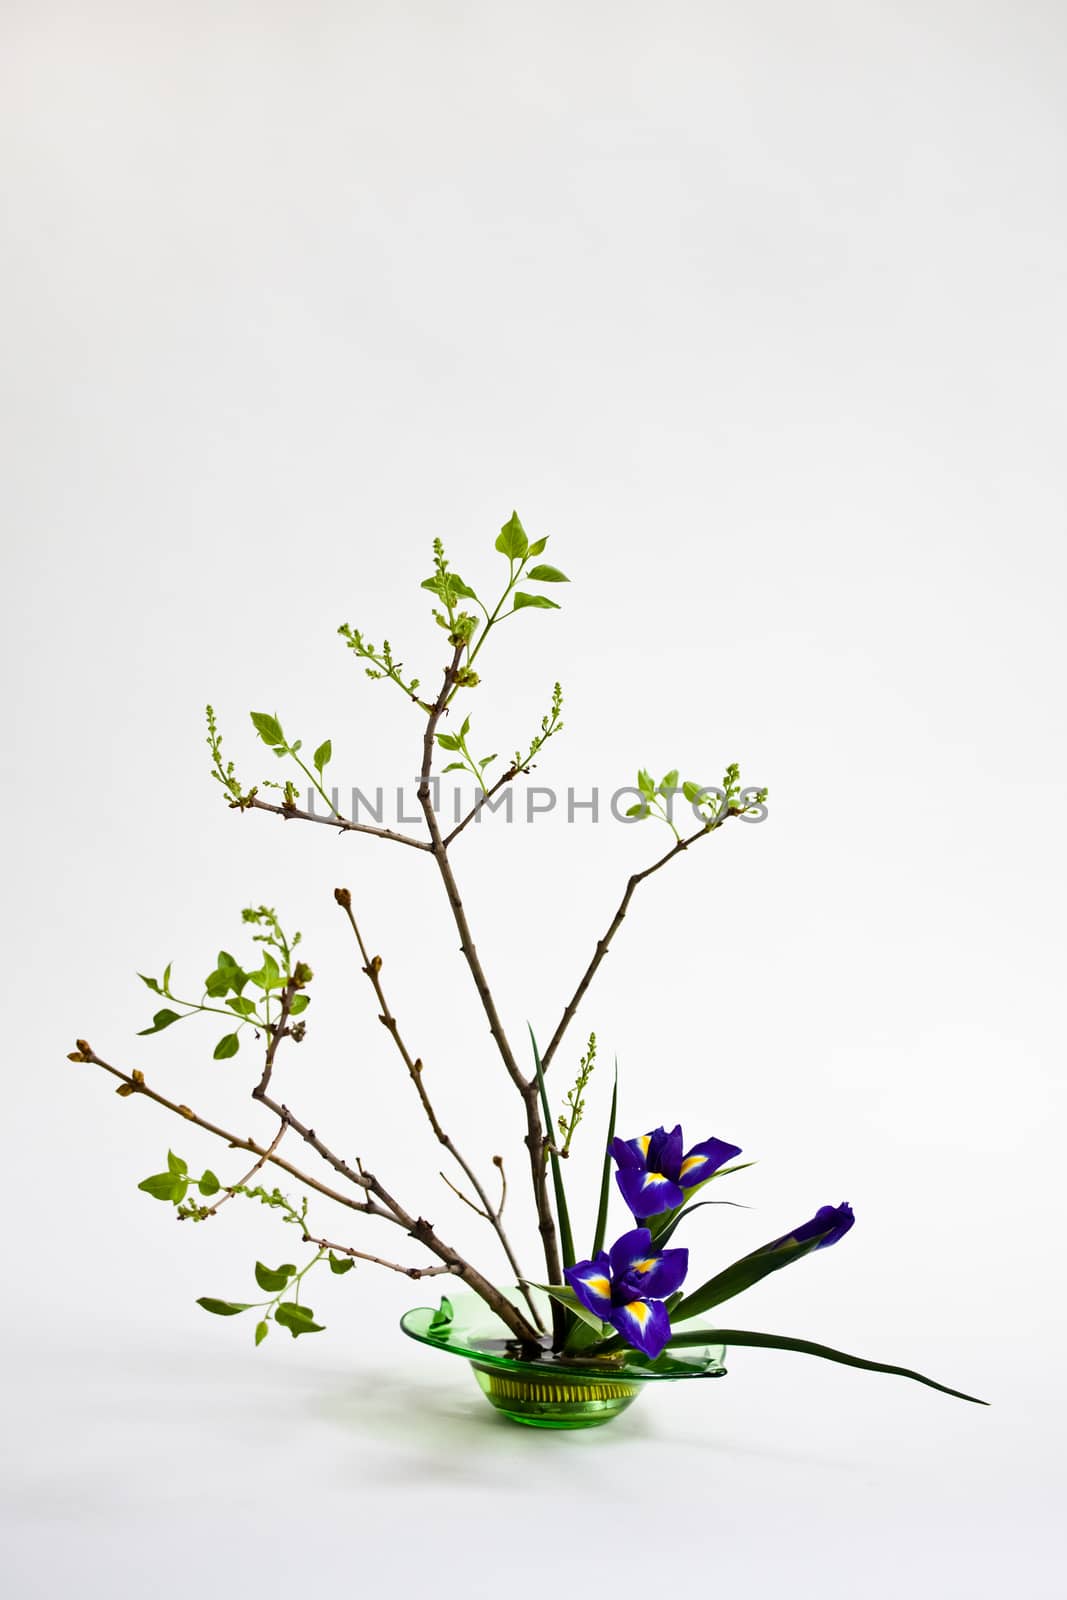 Ikebana with irises and lilac on the light background